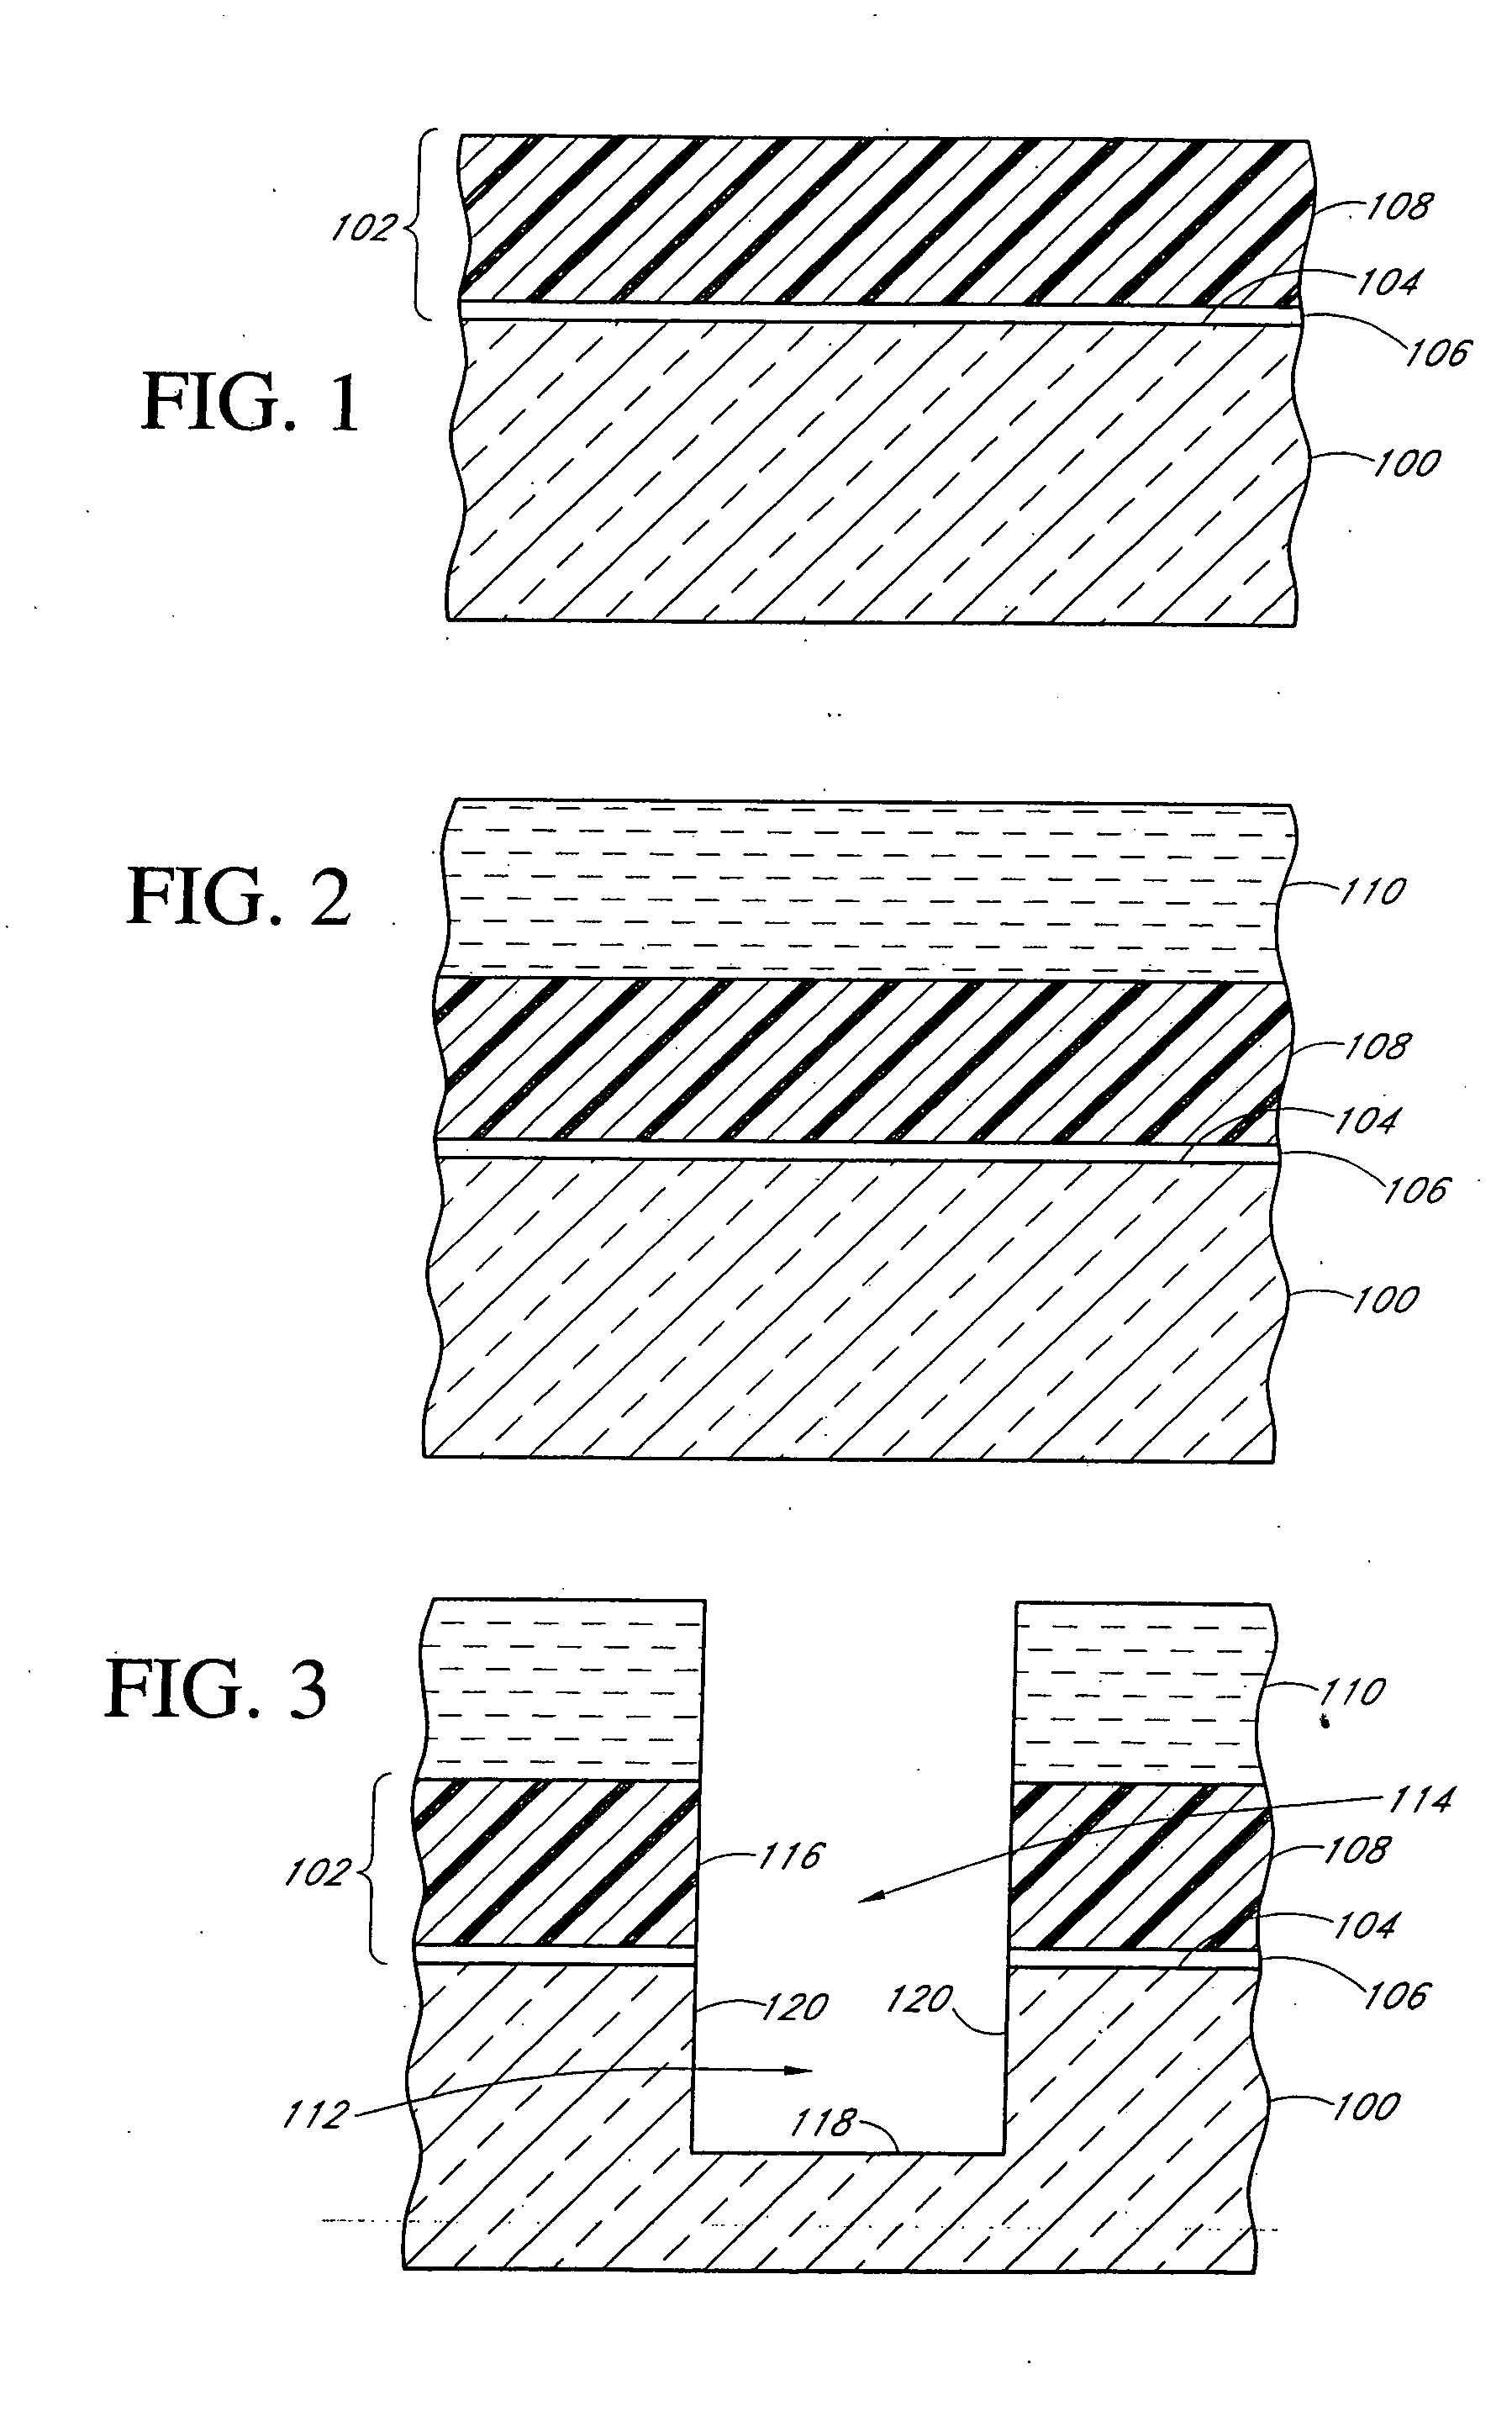 Selectively doped trench device isolation